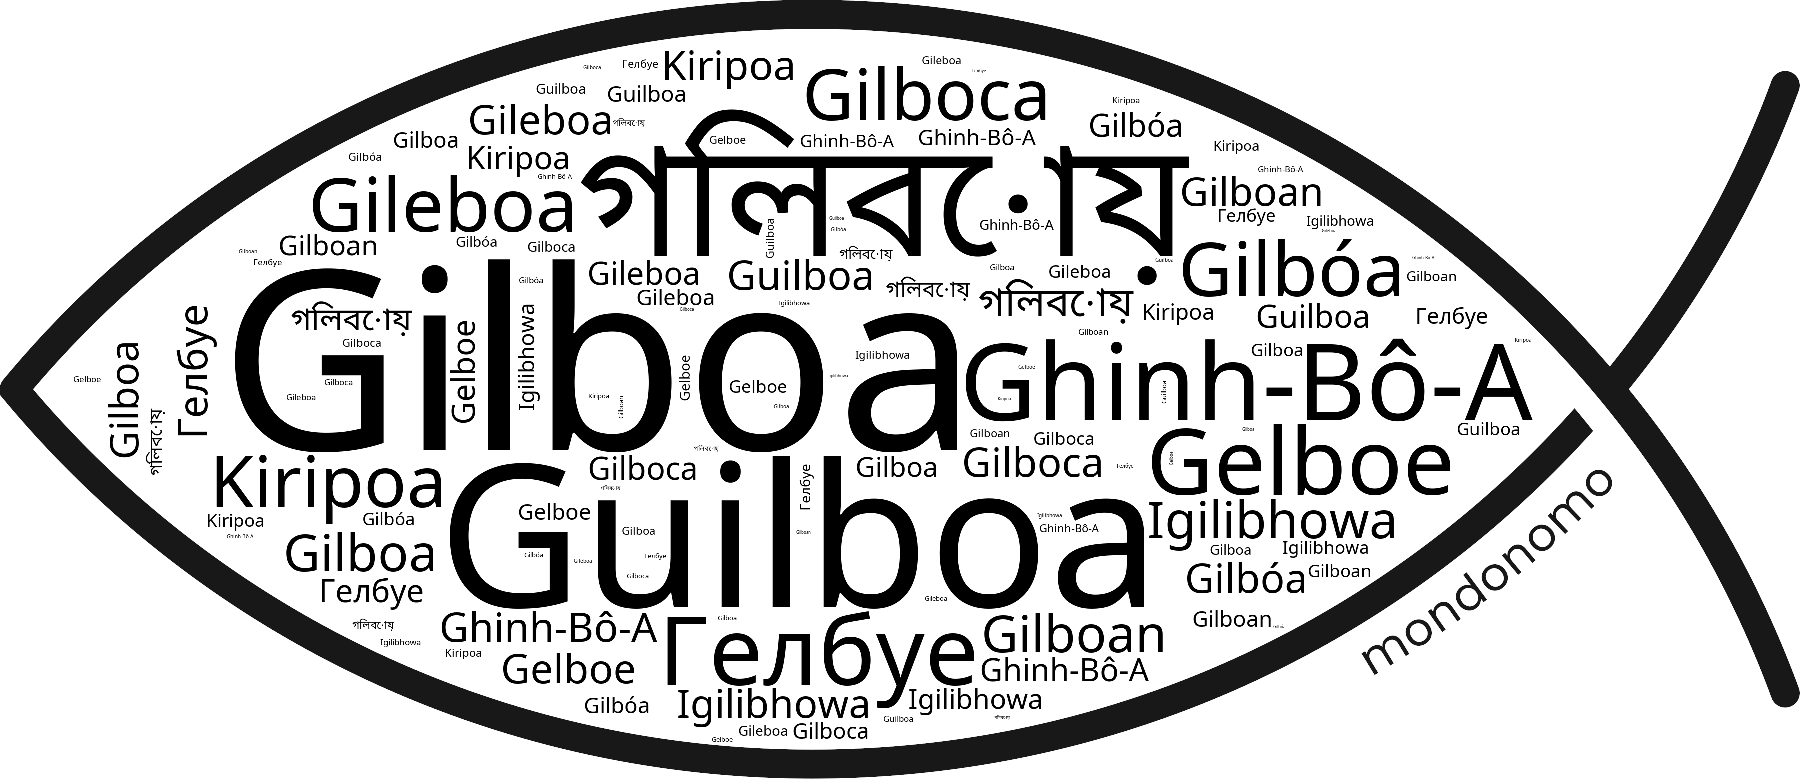 Name Gilboa in the world's Bibles